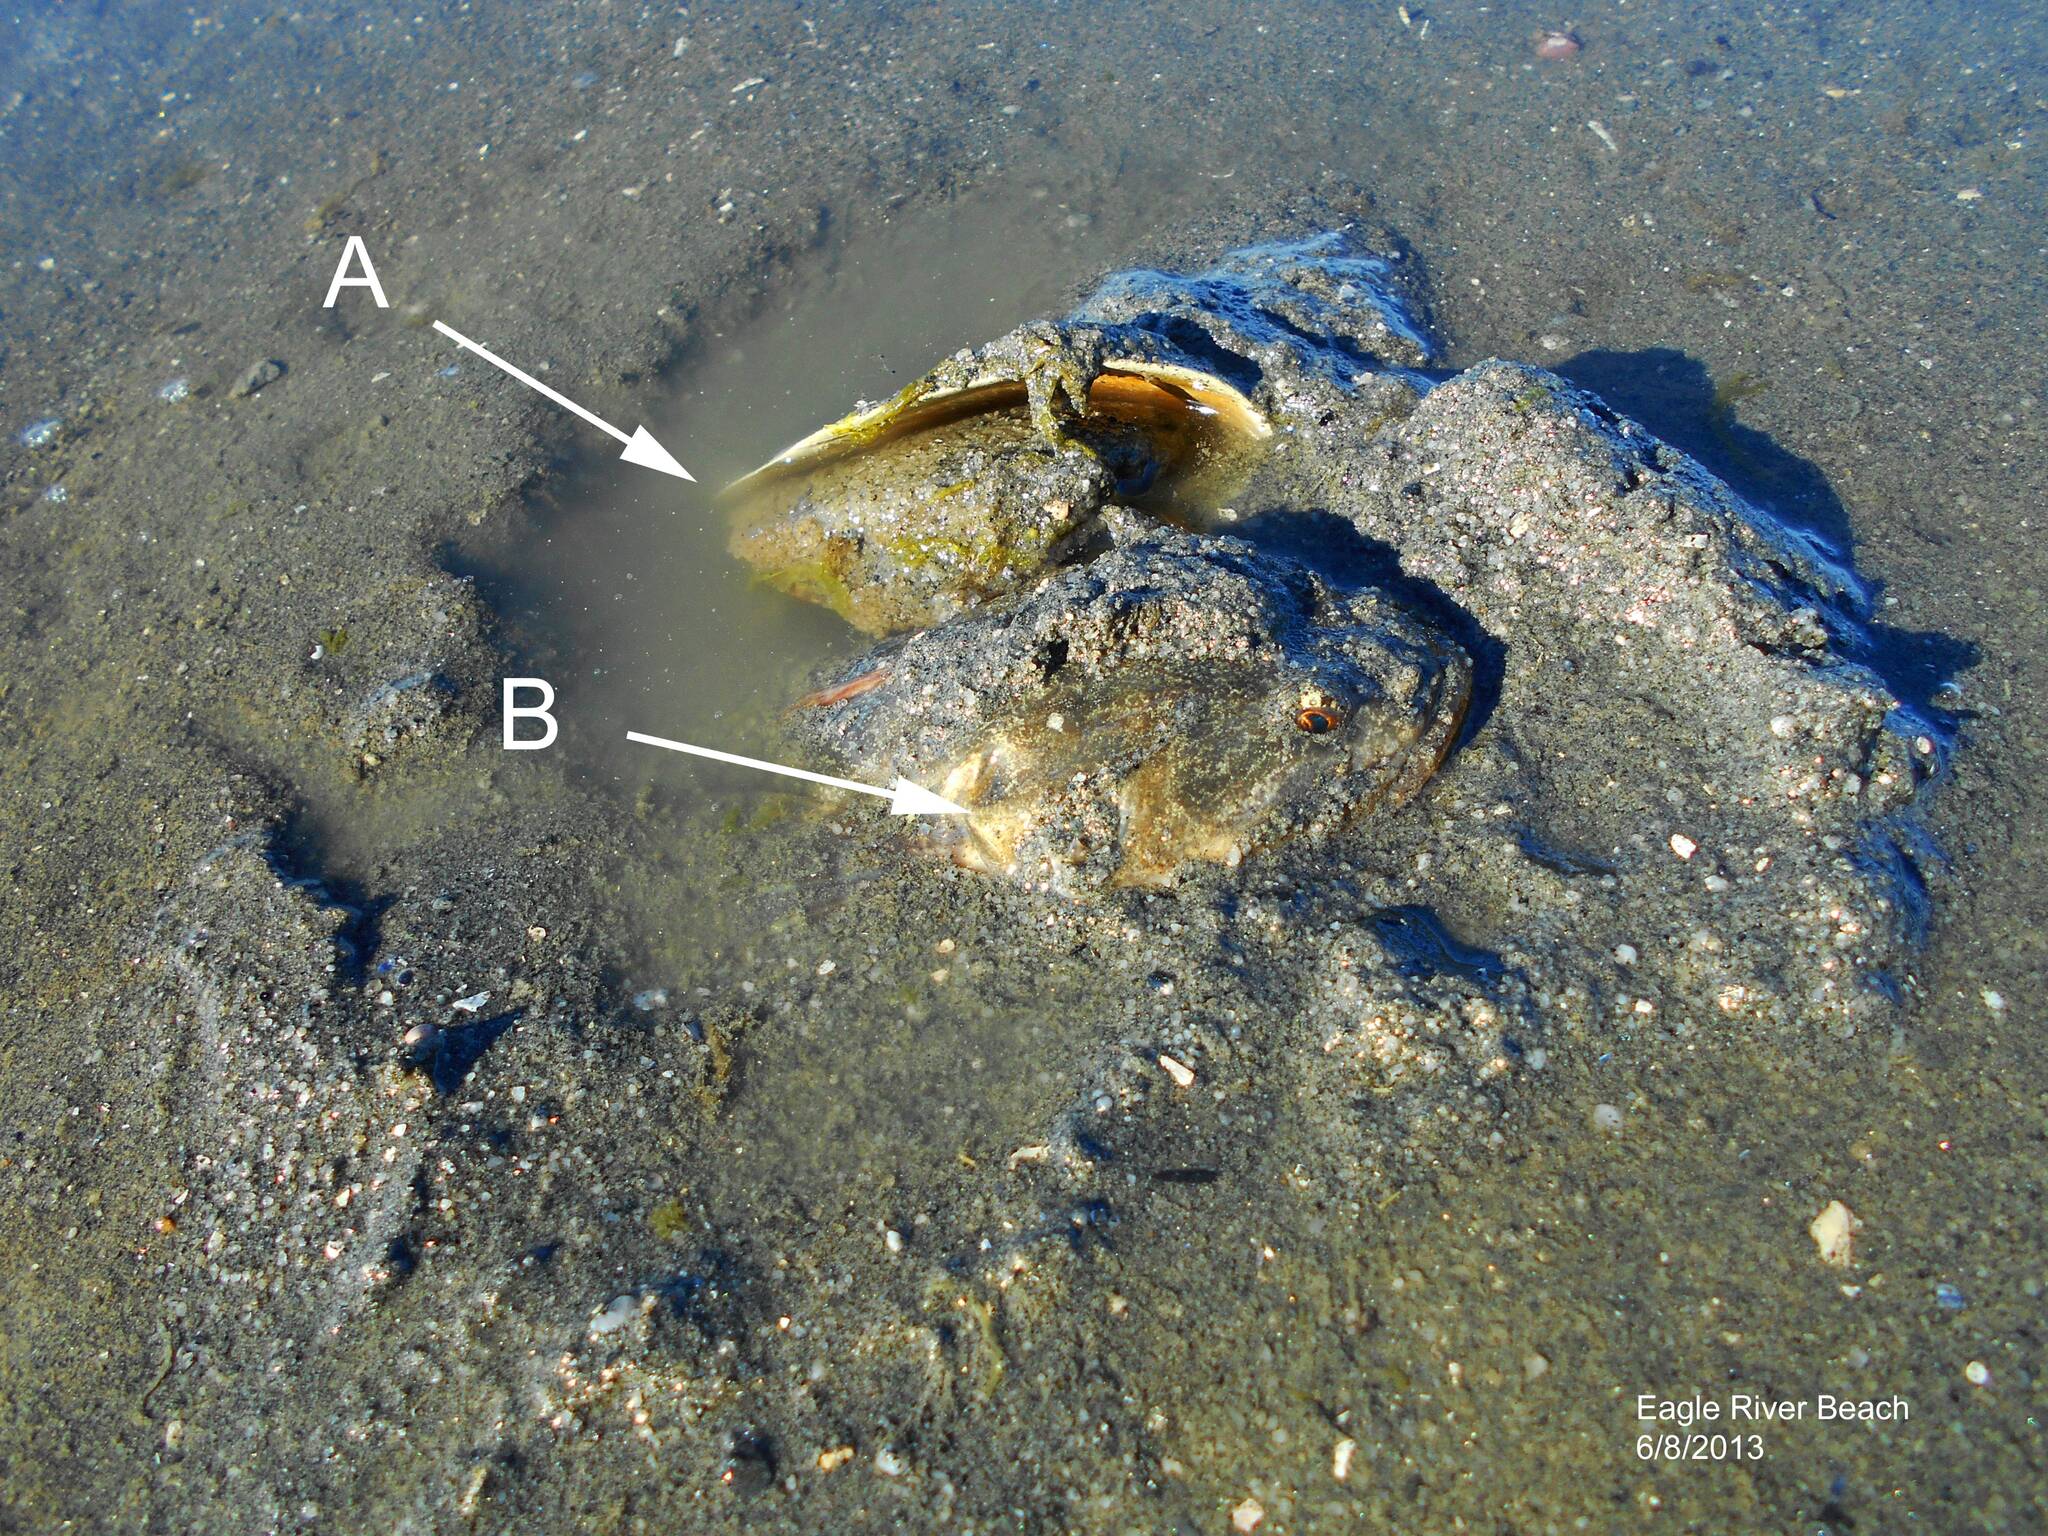 The egg mass under the tipped up shell is indicated by A, and the head of the male sculpin by B. (Courtesy Photo / John Palmes)